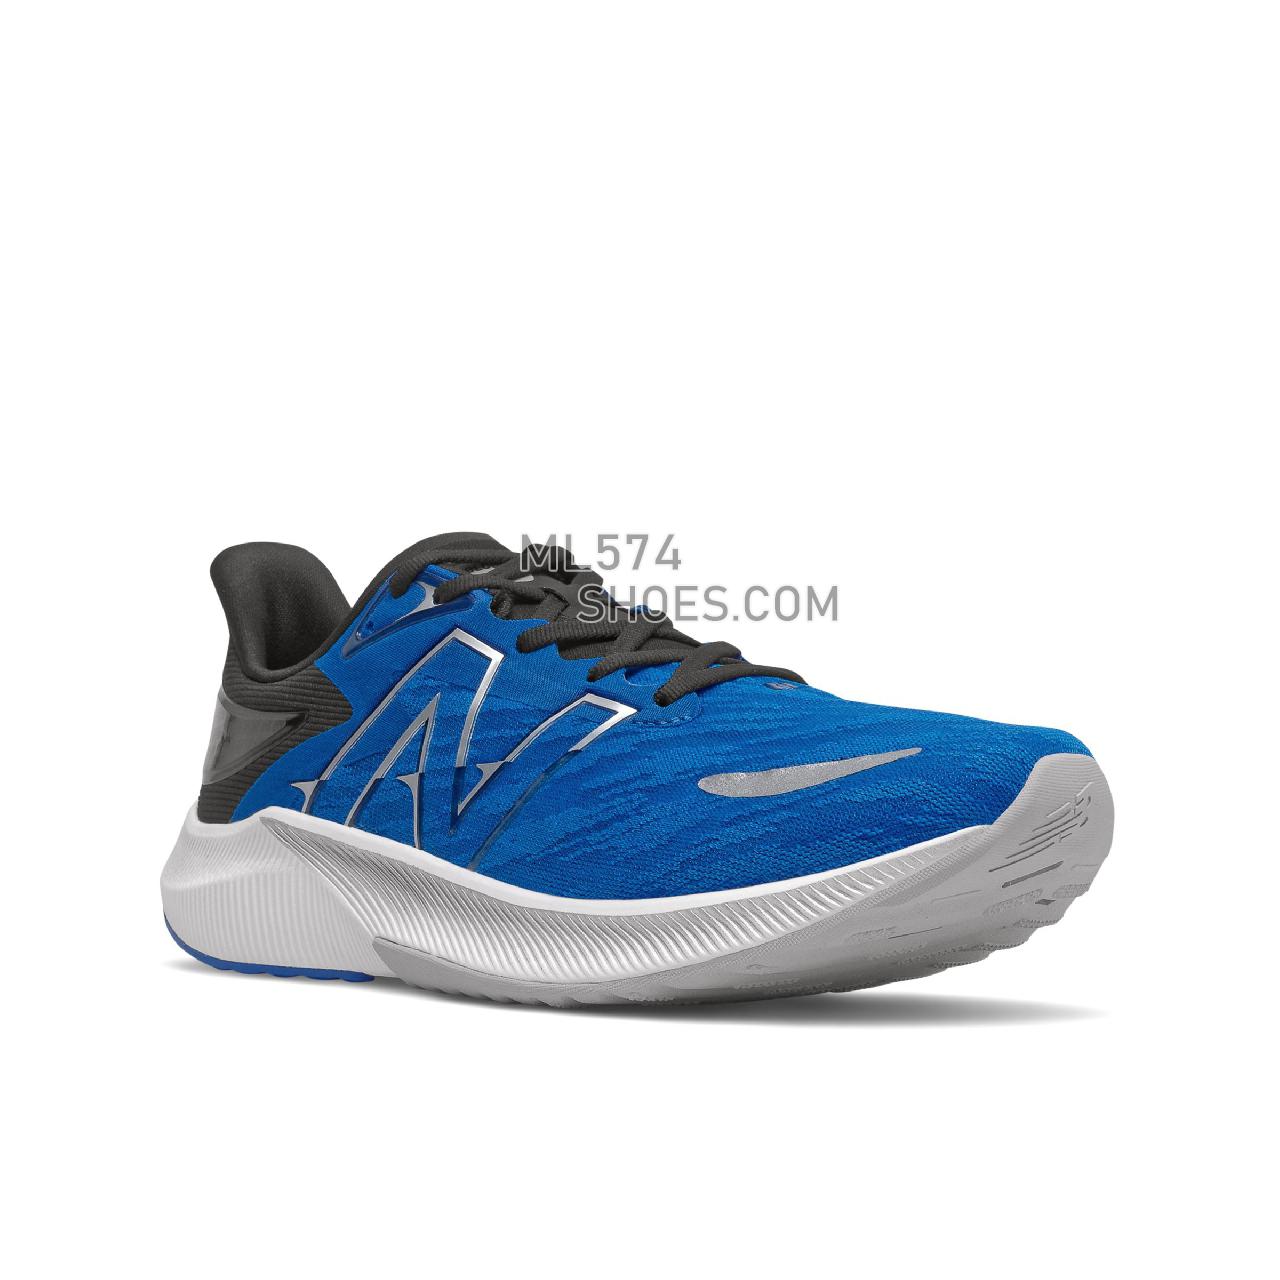 New Balance FuelCell Propel v3 - Men's Neutral Running - Laser Blue with Black - MFCPRLB3